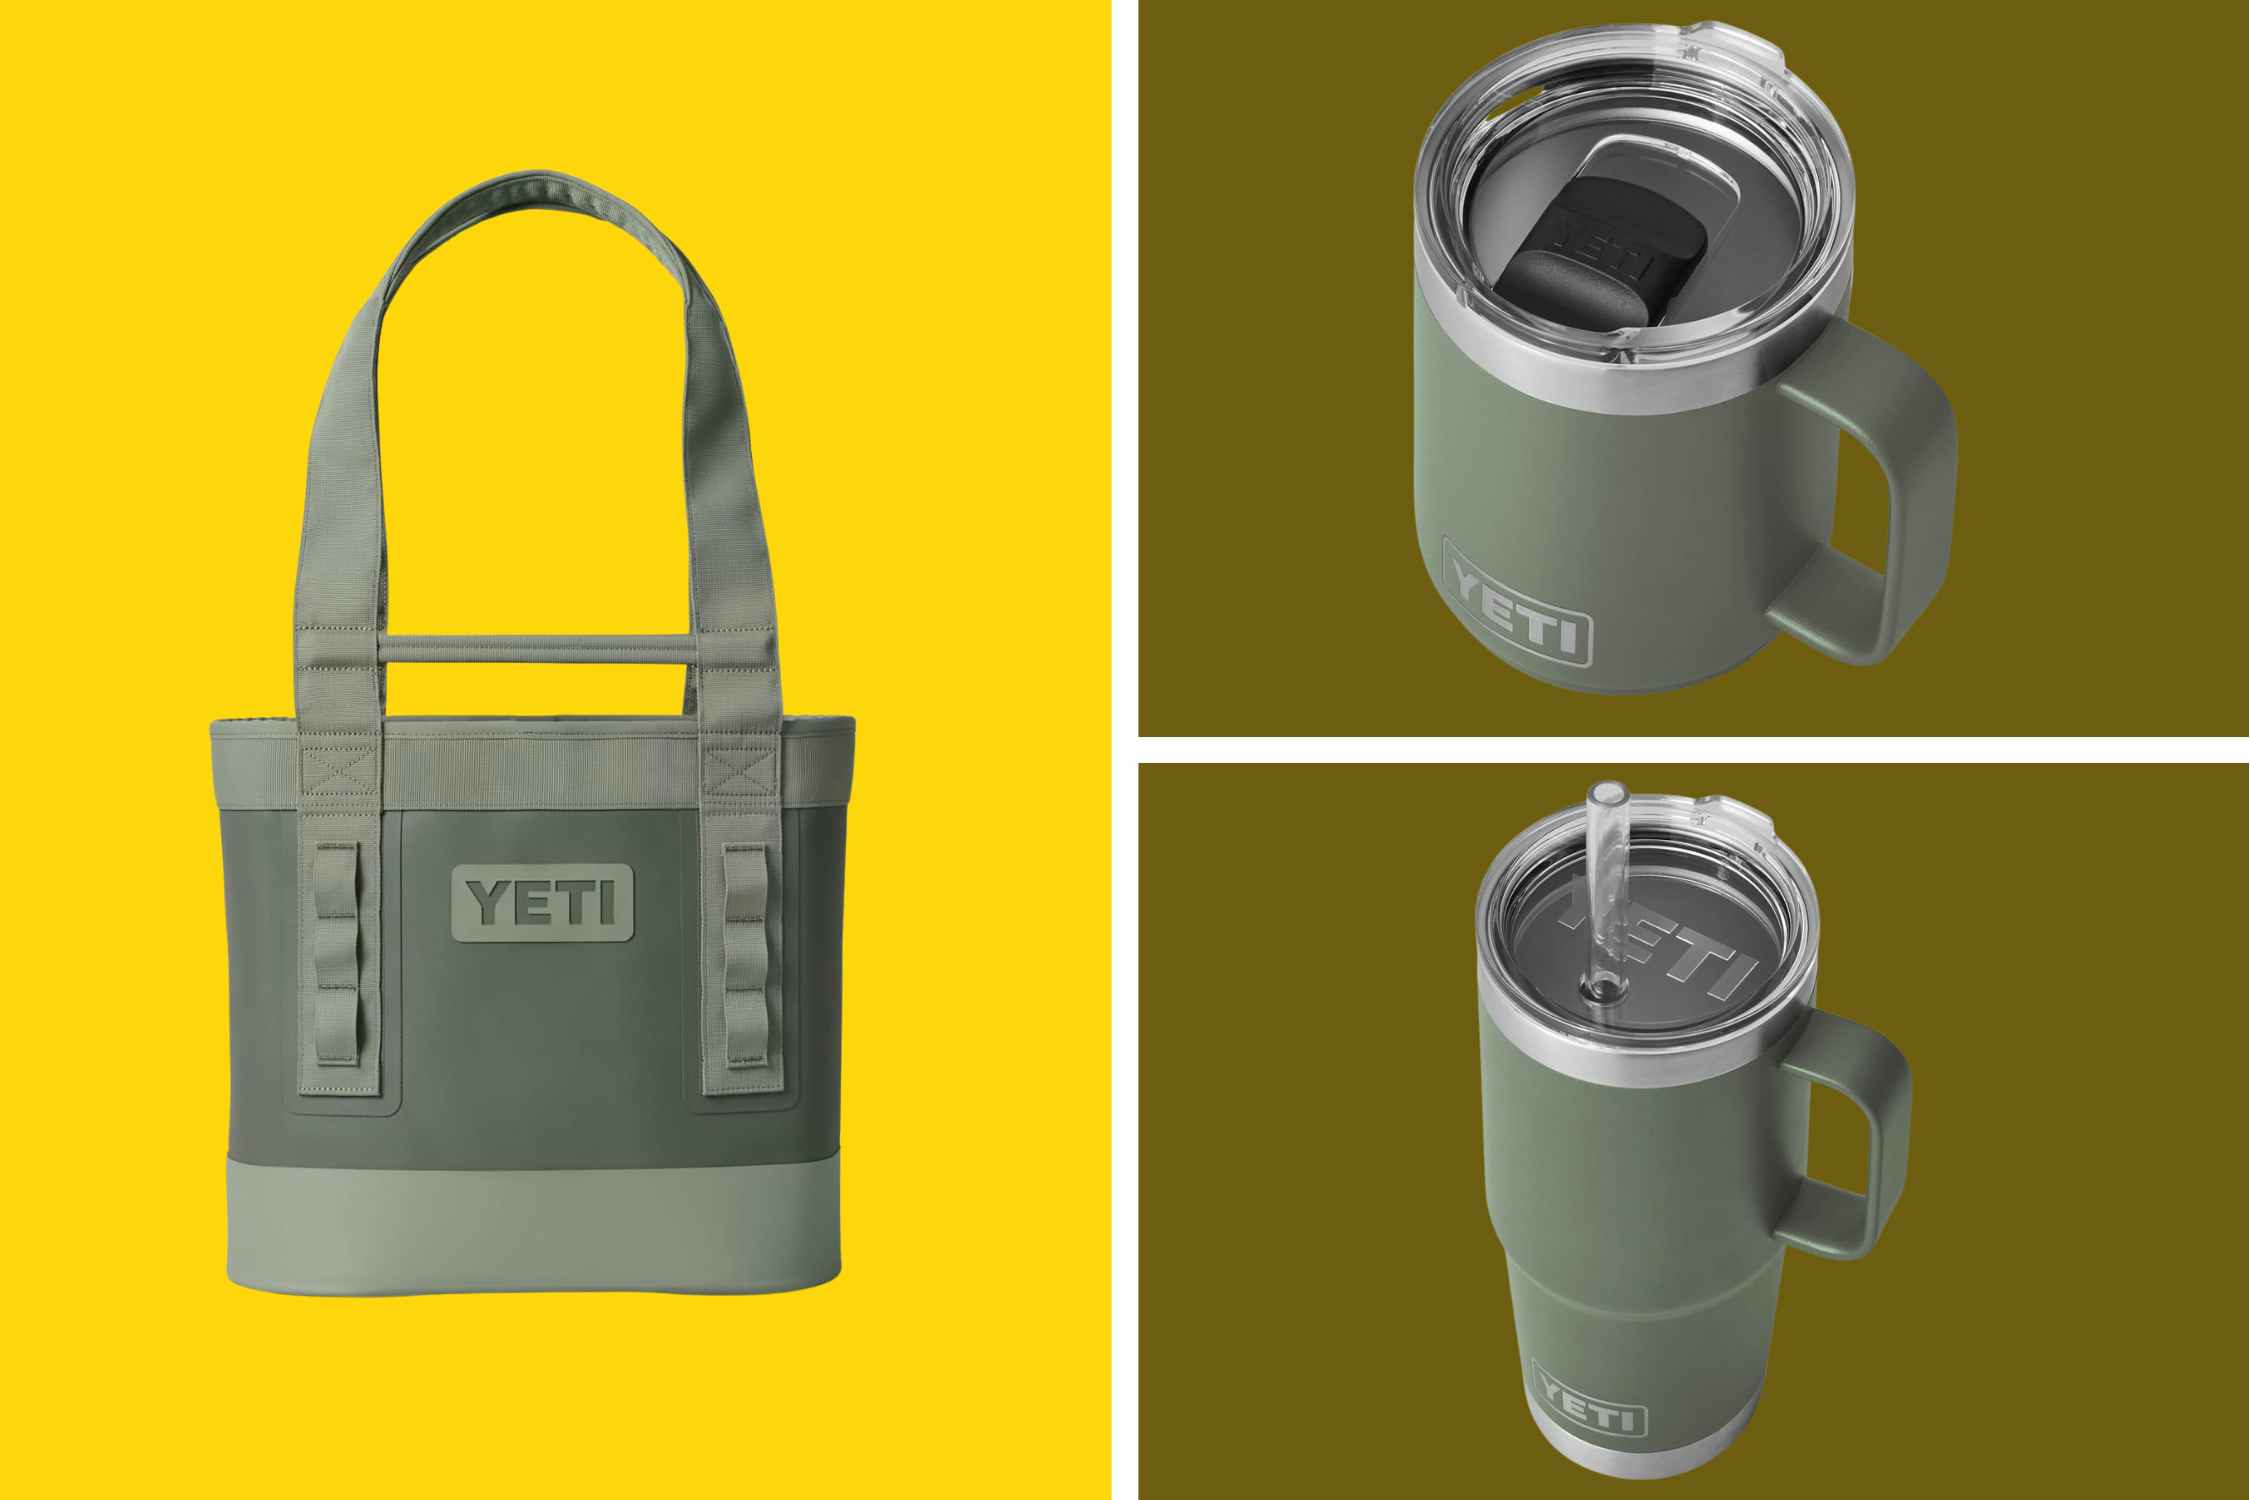 Get 20% Off During Amazon's Rare Sale on Yeti